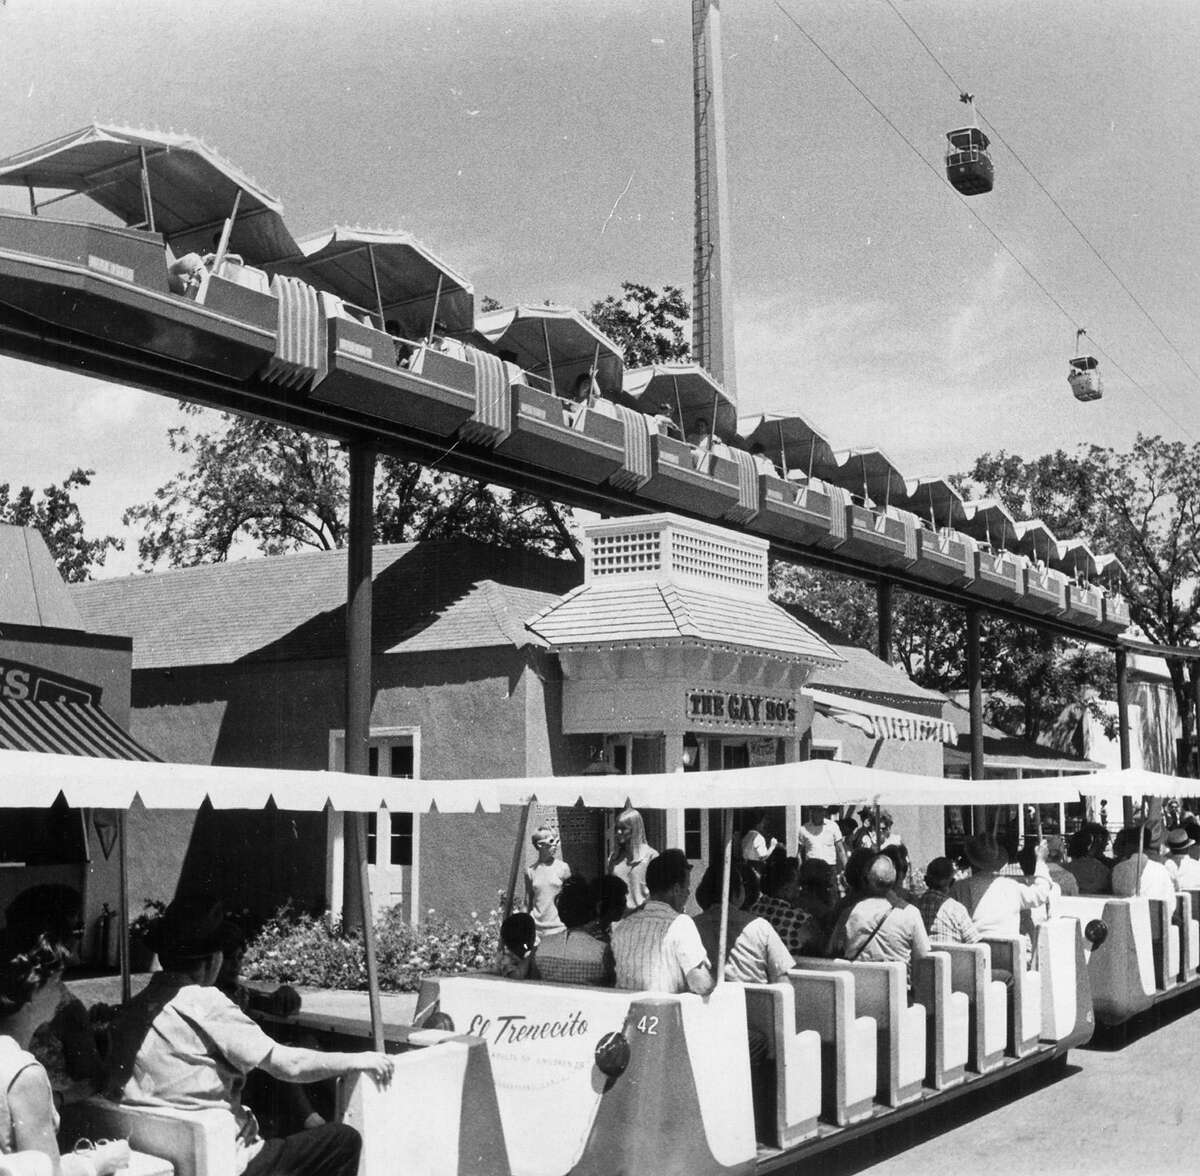 Among the delights of HemisFair ’68 was the mini-monorail. The history of the fair — including the years that led to its opening and the long struggle to figure out what to do with the site after it closed — is explored in “Viva HemisFair,” an exhibit at the Institute of Texan Cultures.